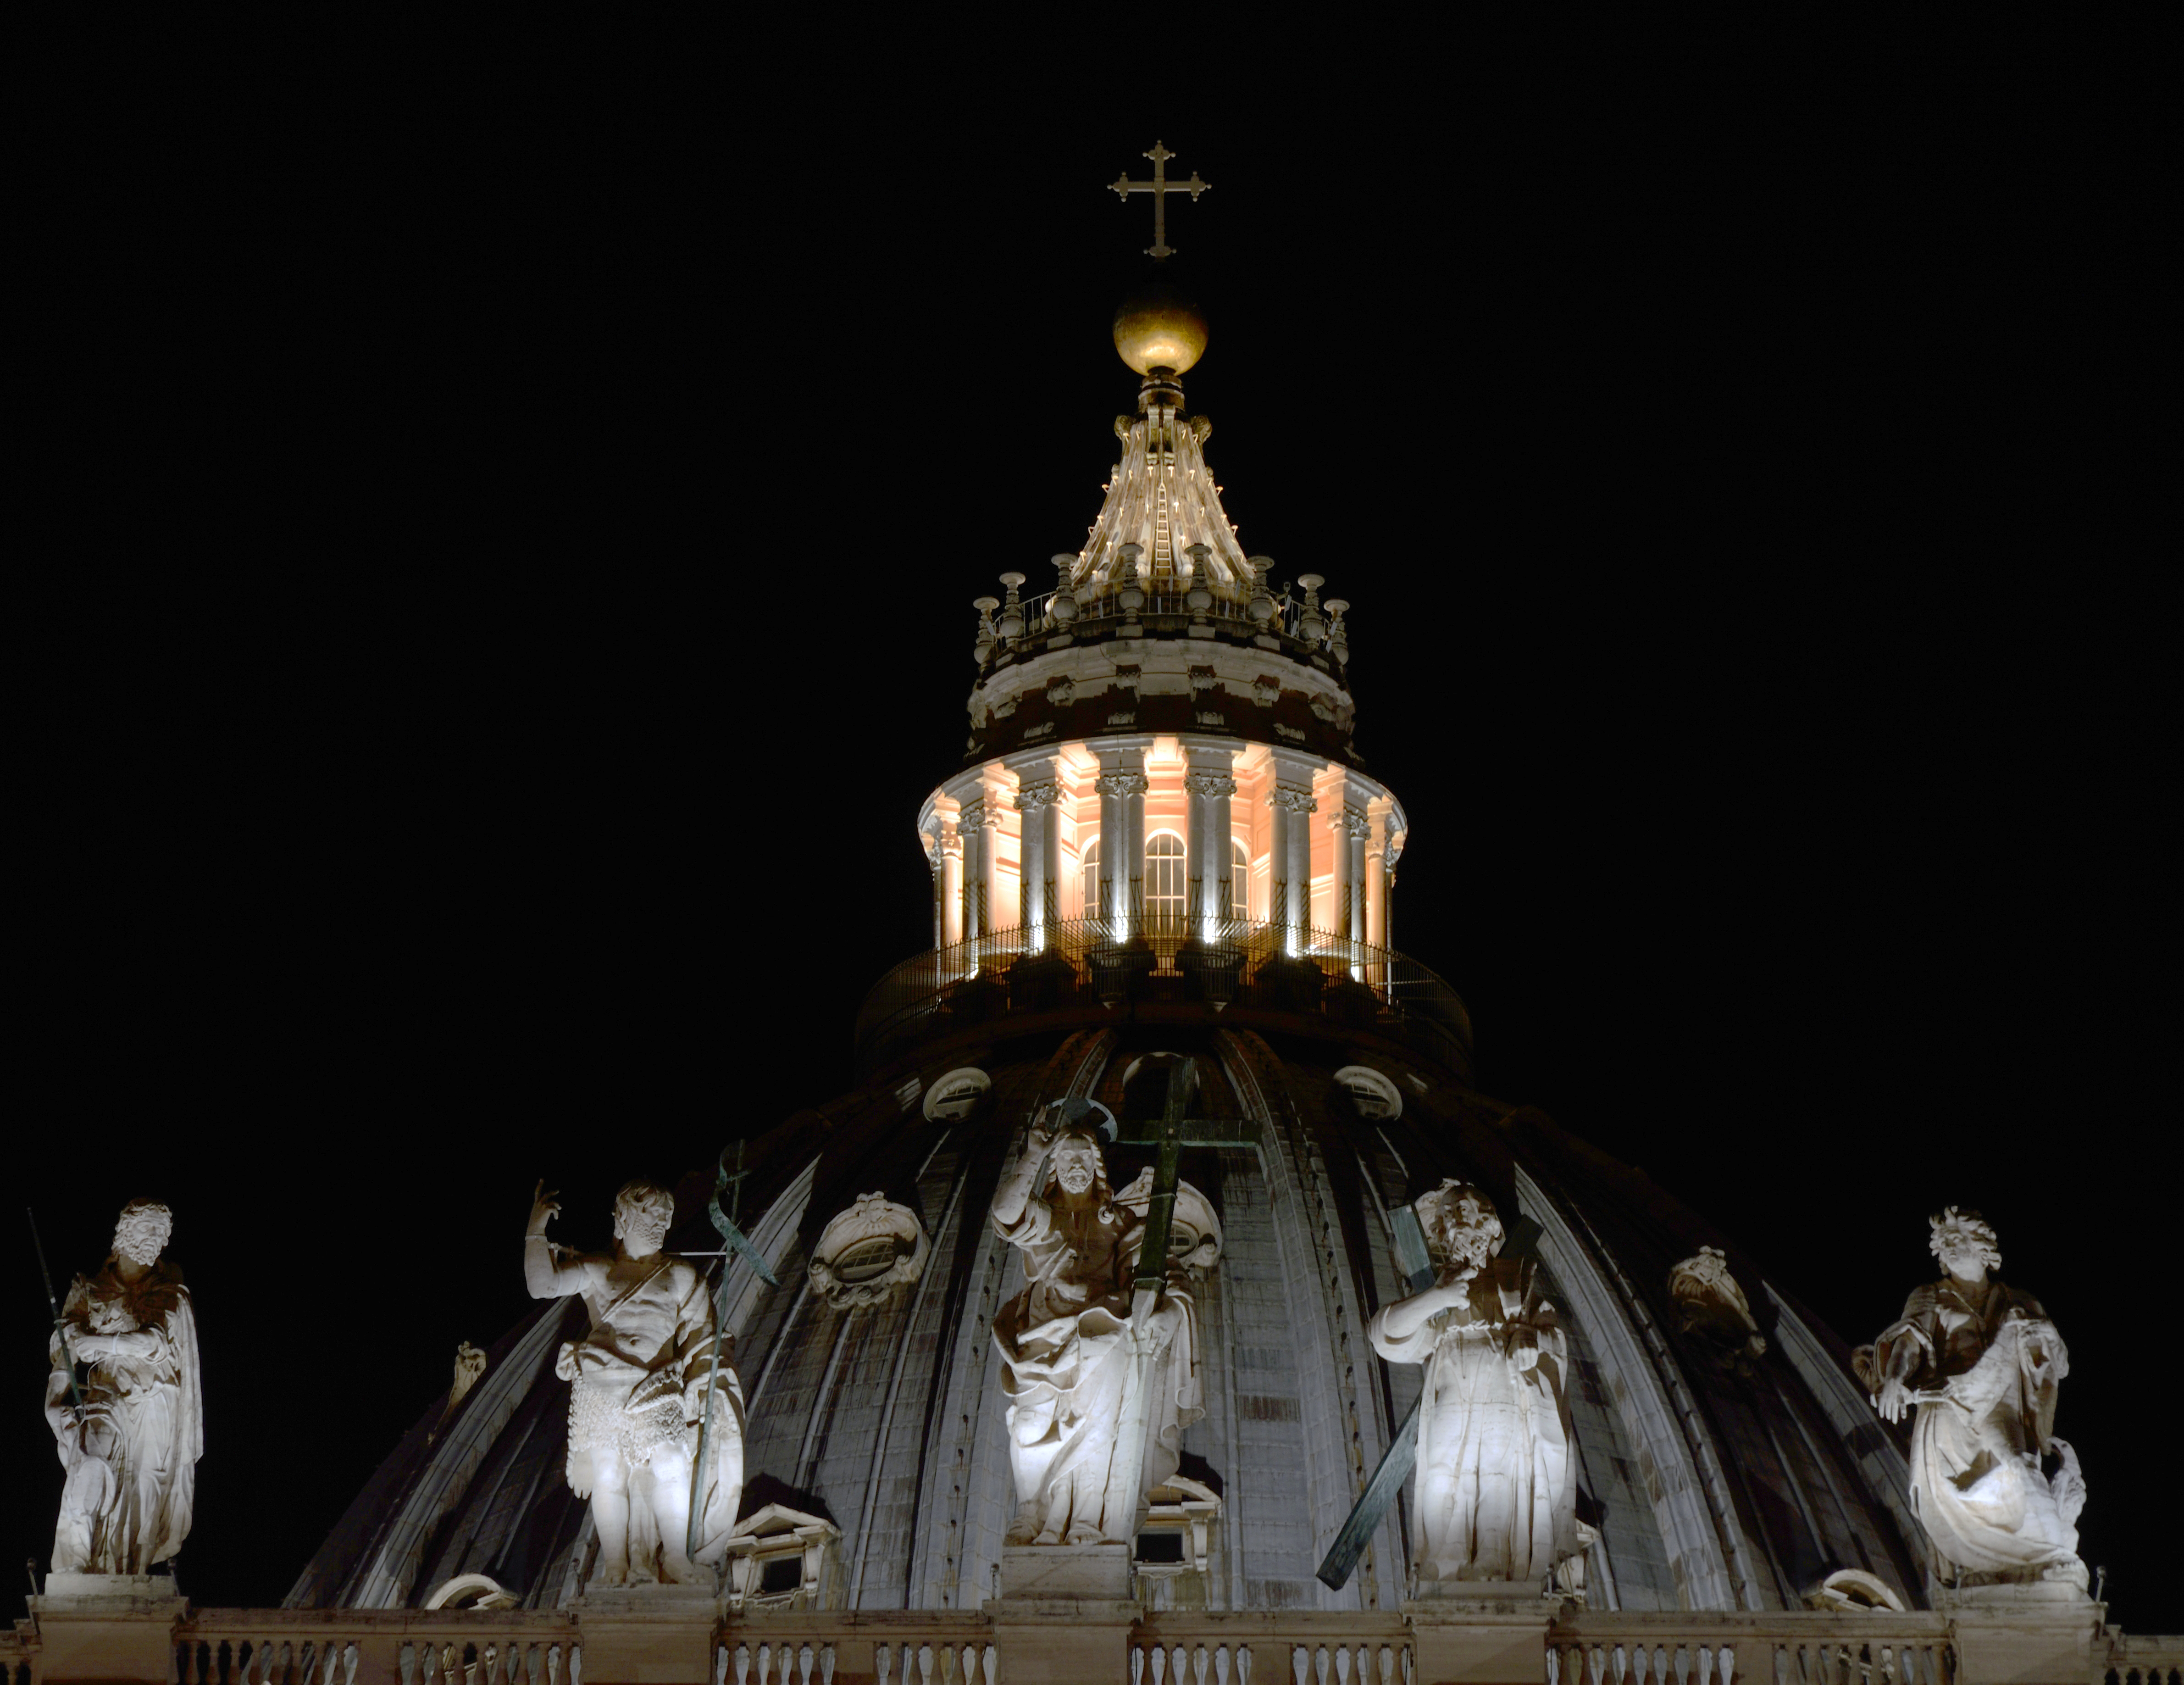 Dome of St. Peter and statues at night